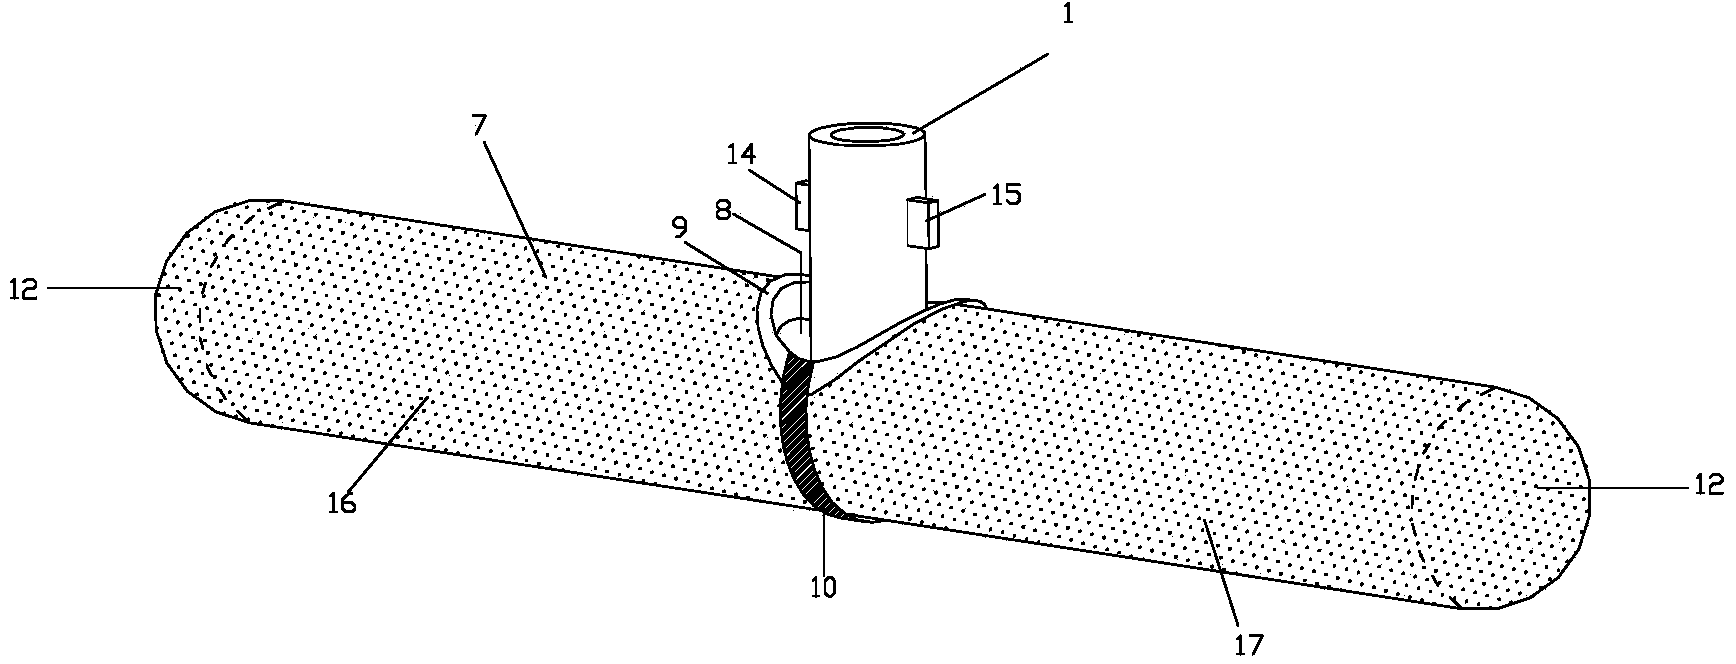 Aeration pipe with pipe end being hemispheric aeration plate